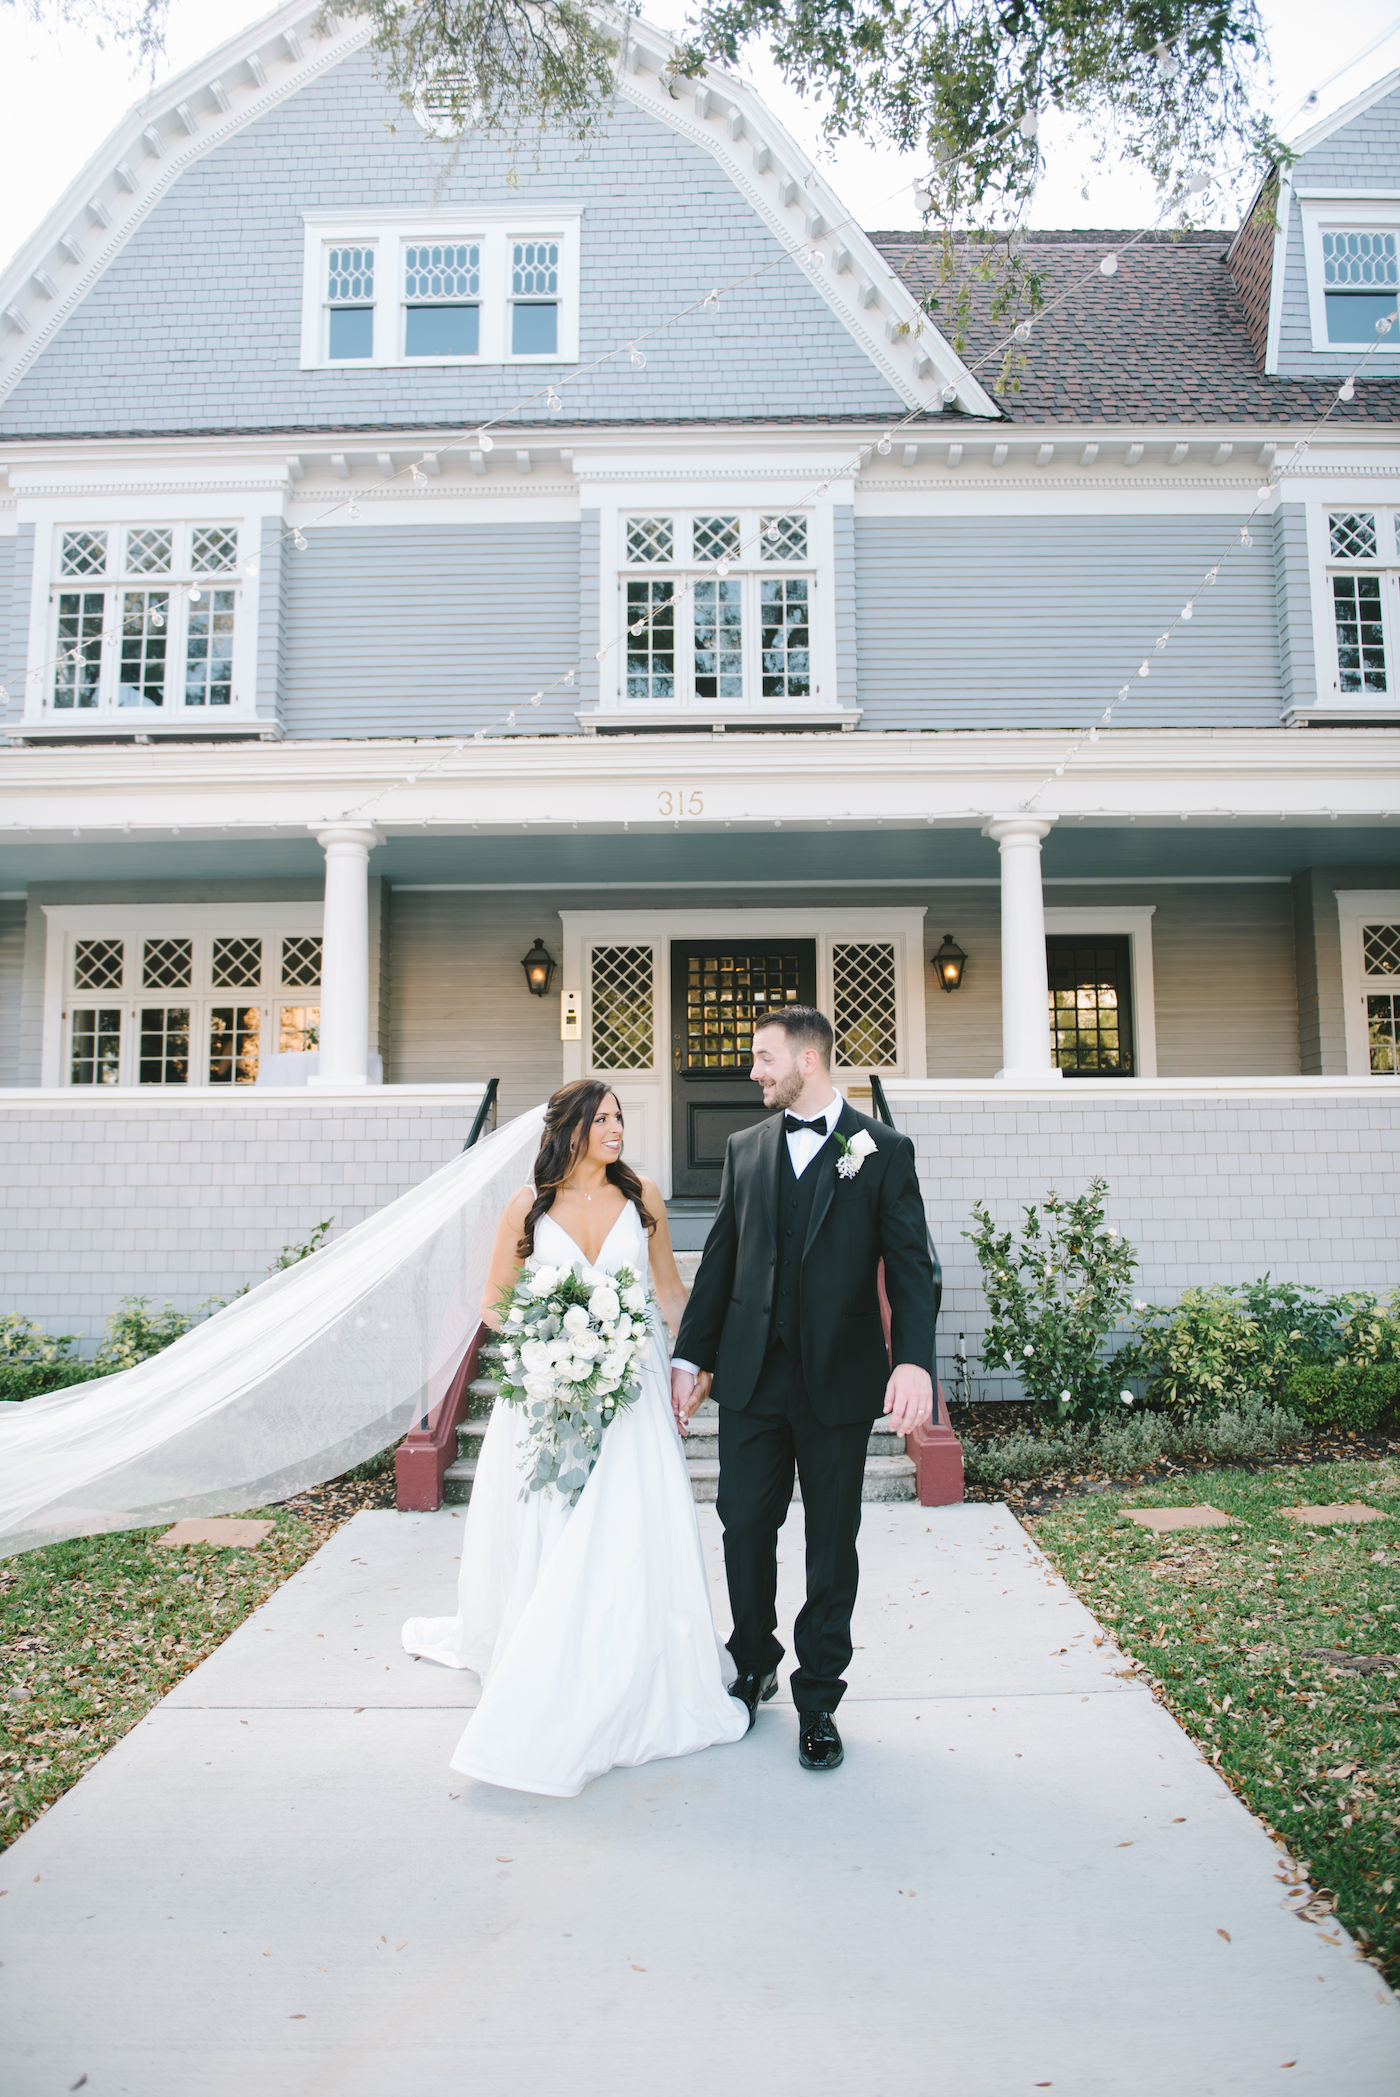 Romantic Classic Bride and Groom Outside Historic Wedding Venue The Orlo | Bride in Full Length Veil Holding Lush Greenery and White Floral Bouquet, Groom in Classic Black Tuxedo | Tampa Bay Wedding Photographer Kera Photography